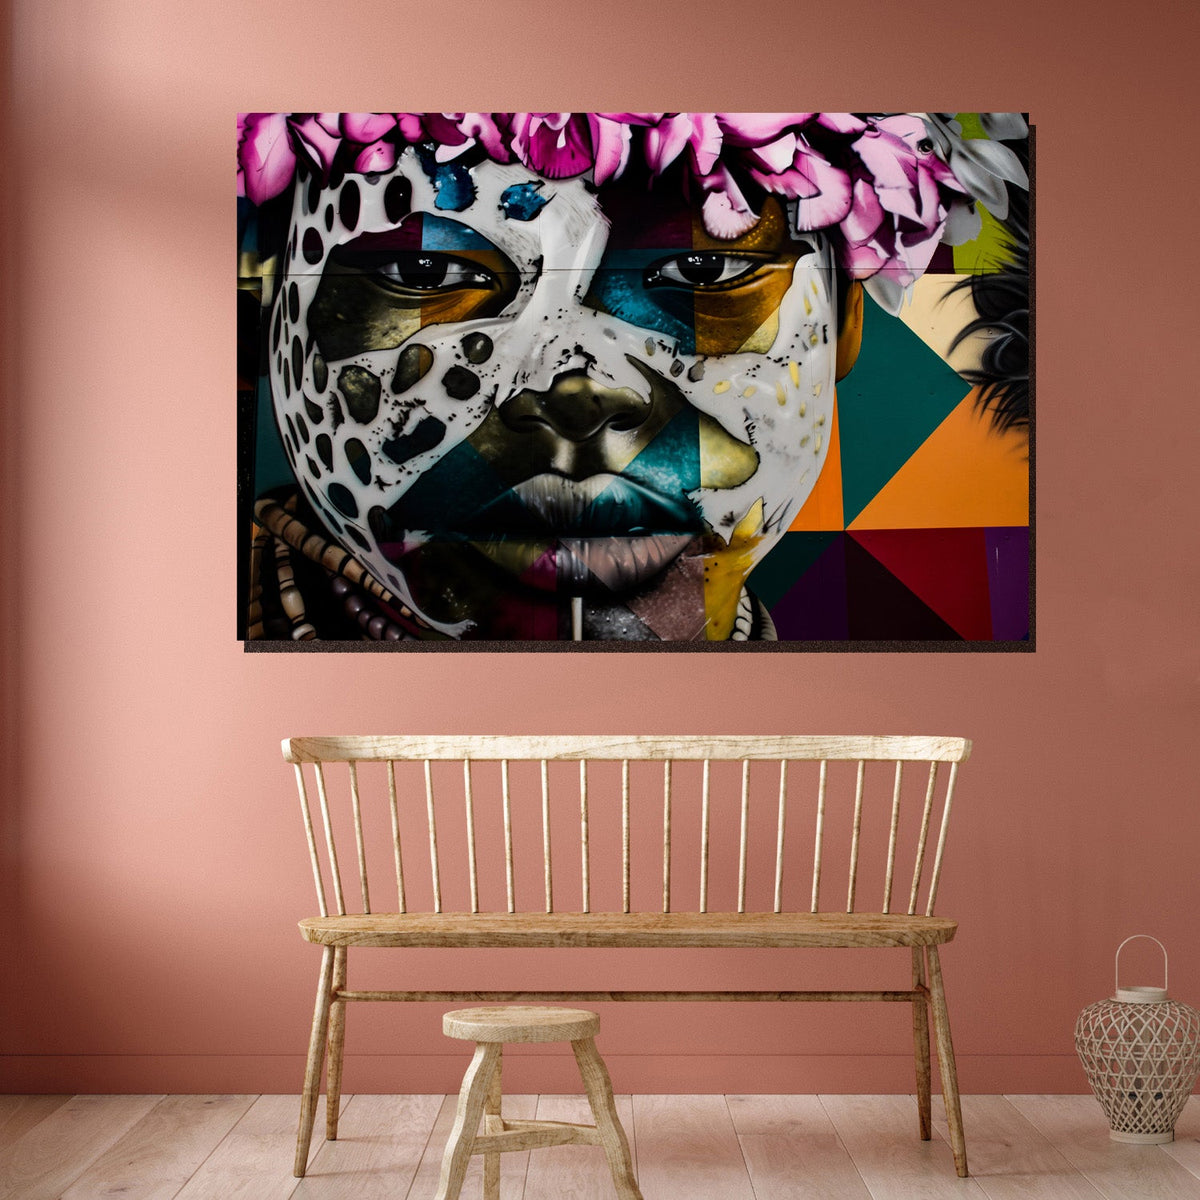 https://cdn.shopify.com/s/files/1/0387/9986/8044/products/AfricanBoyCanvasArtPrintStretched-3.jpg